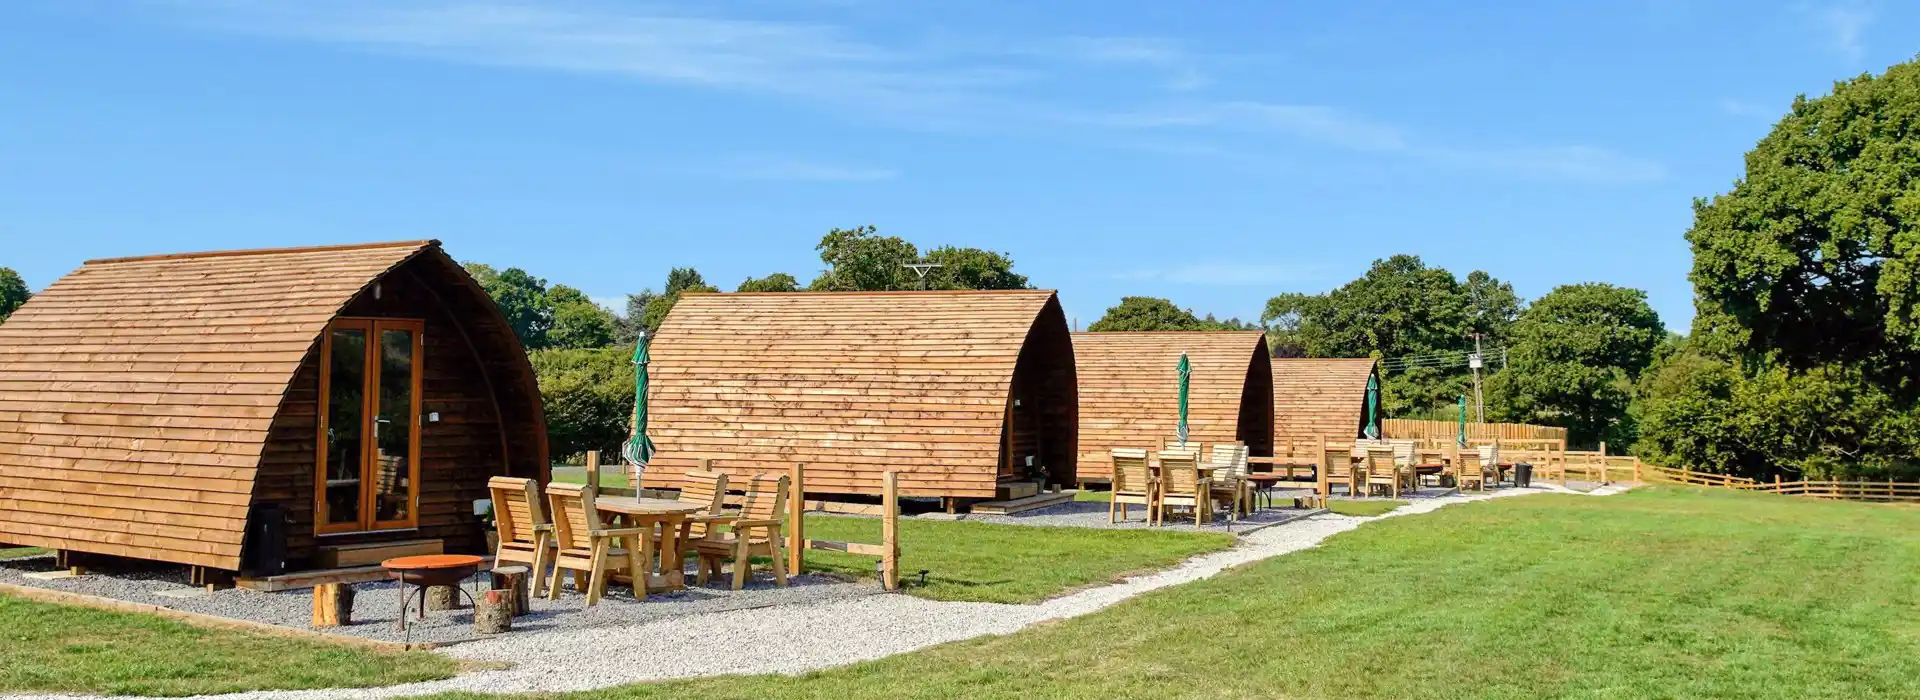 Camping and glamping pods in Clitheroe